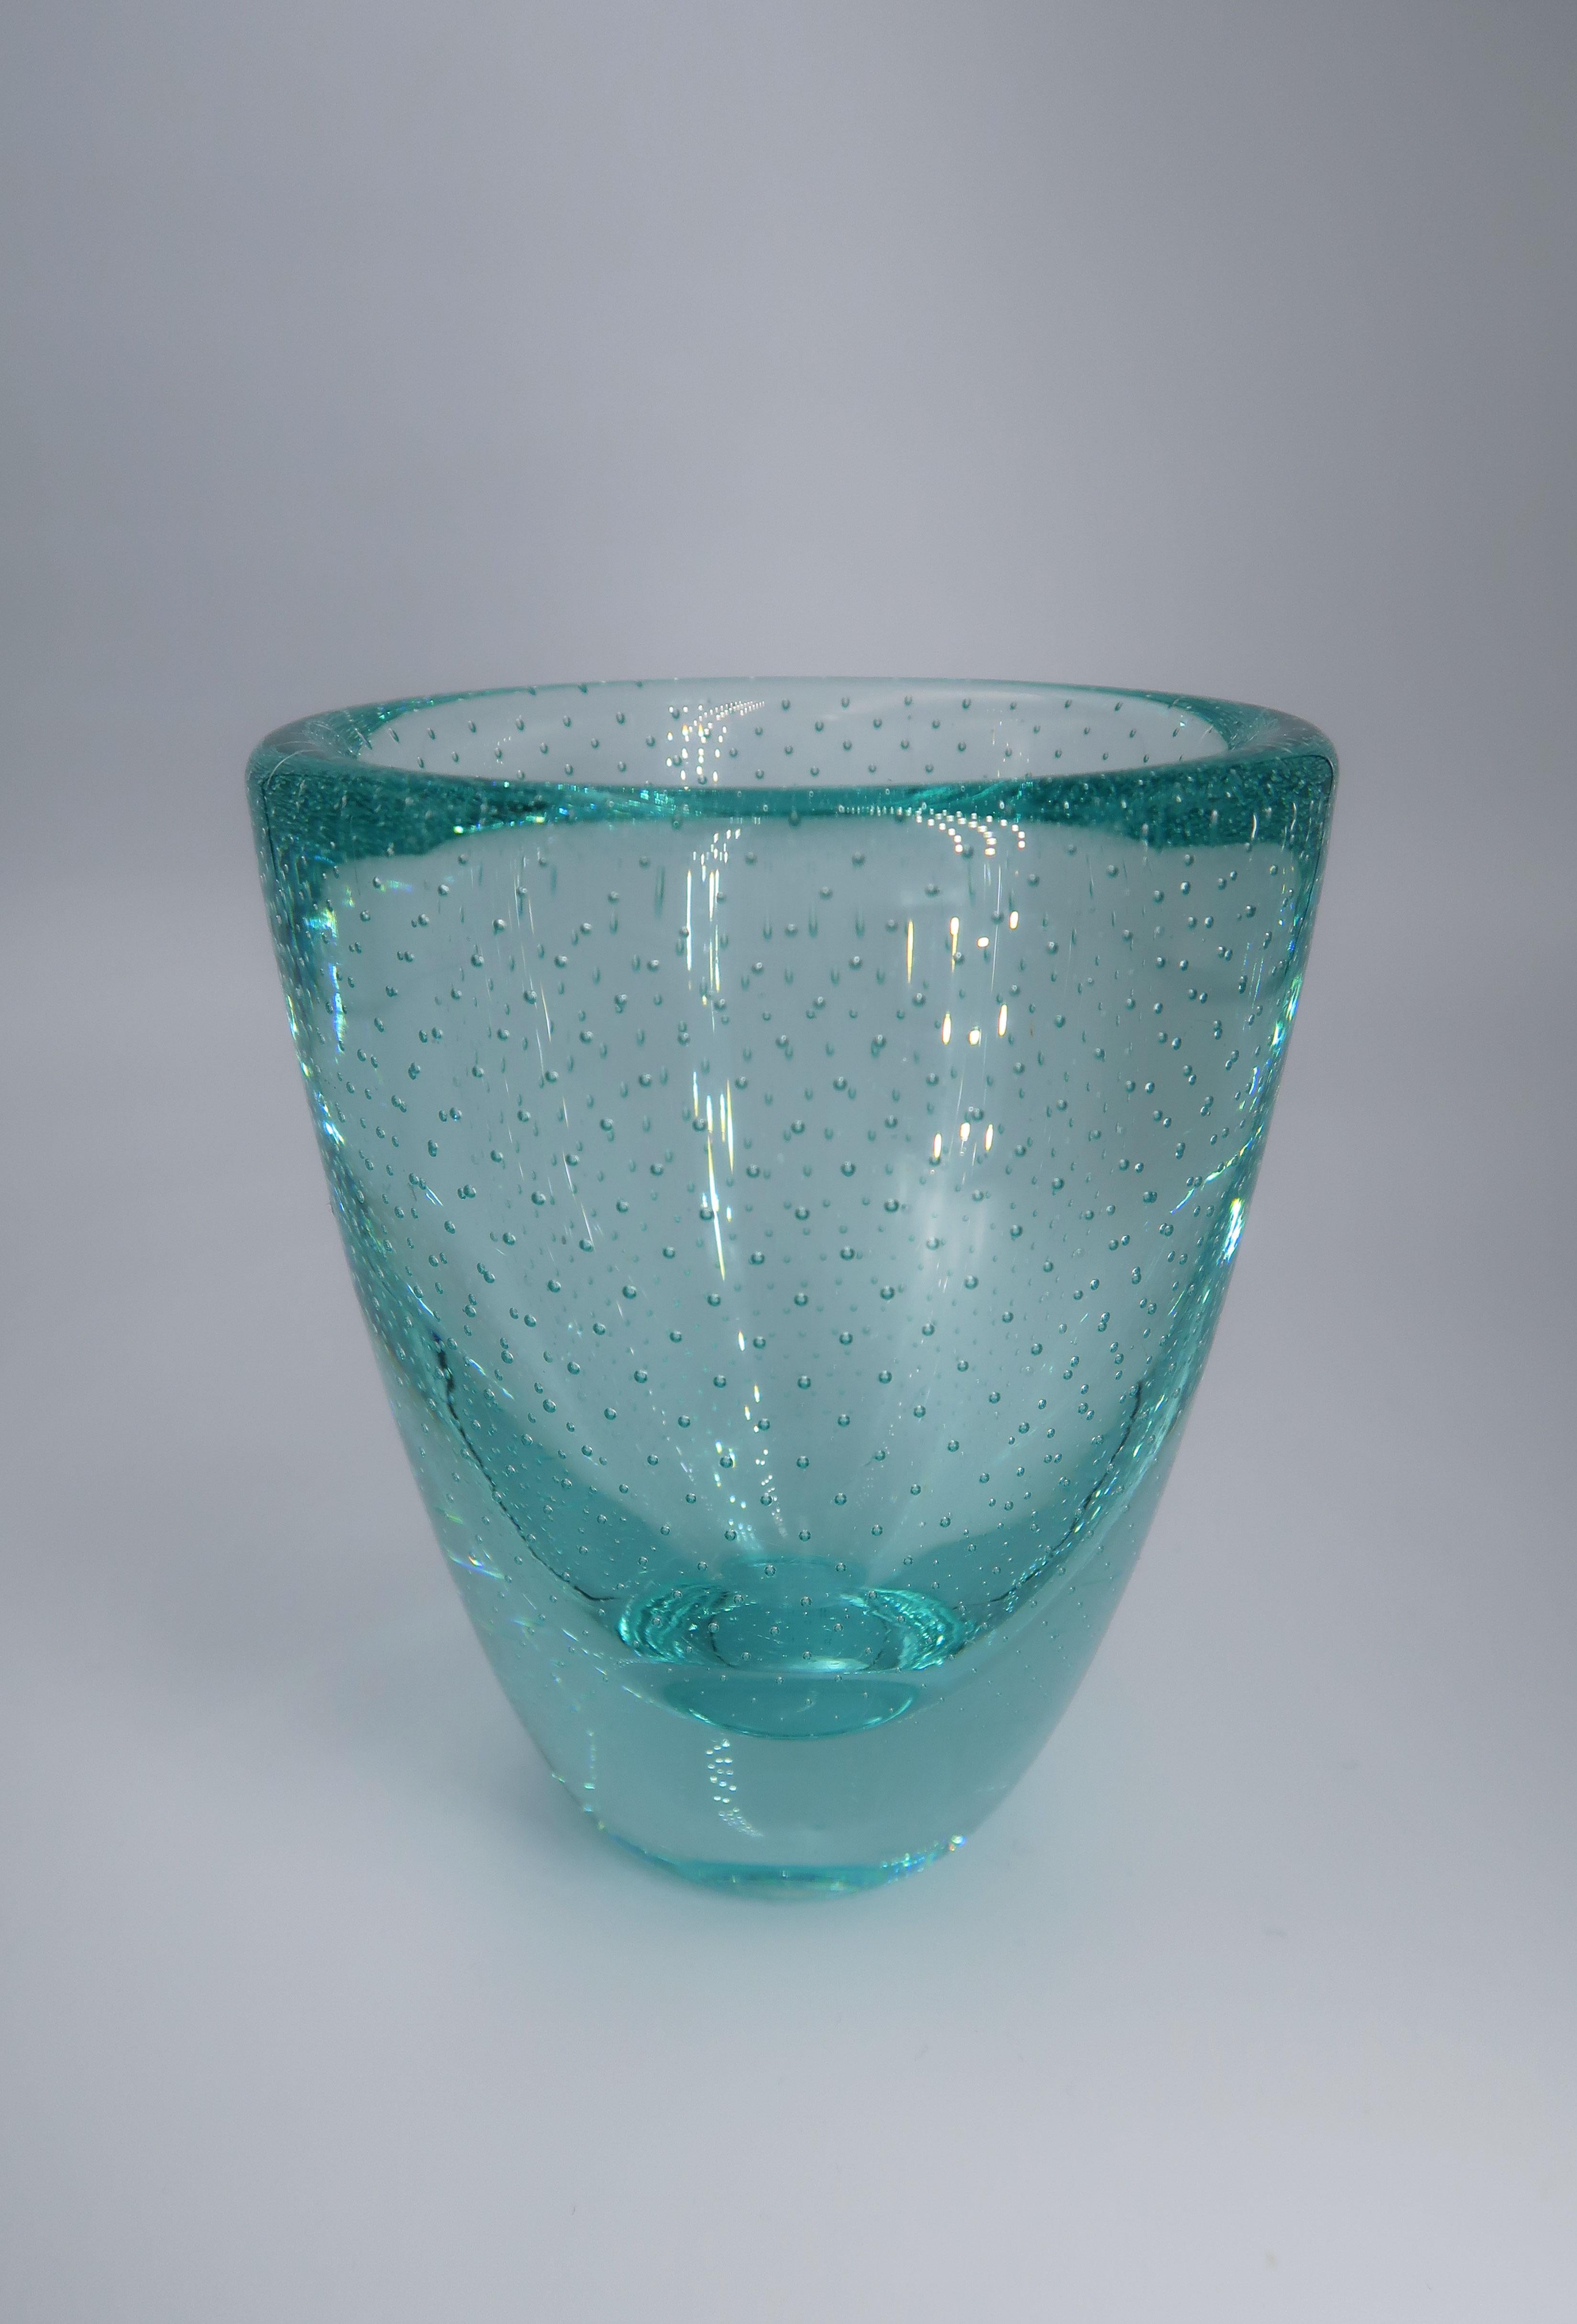 vintage glass with bubbles